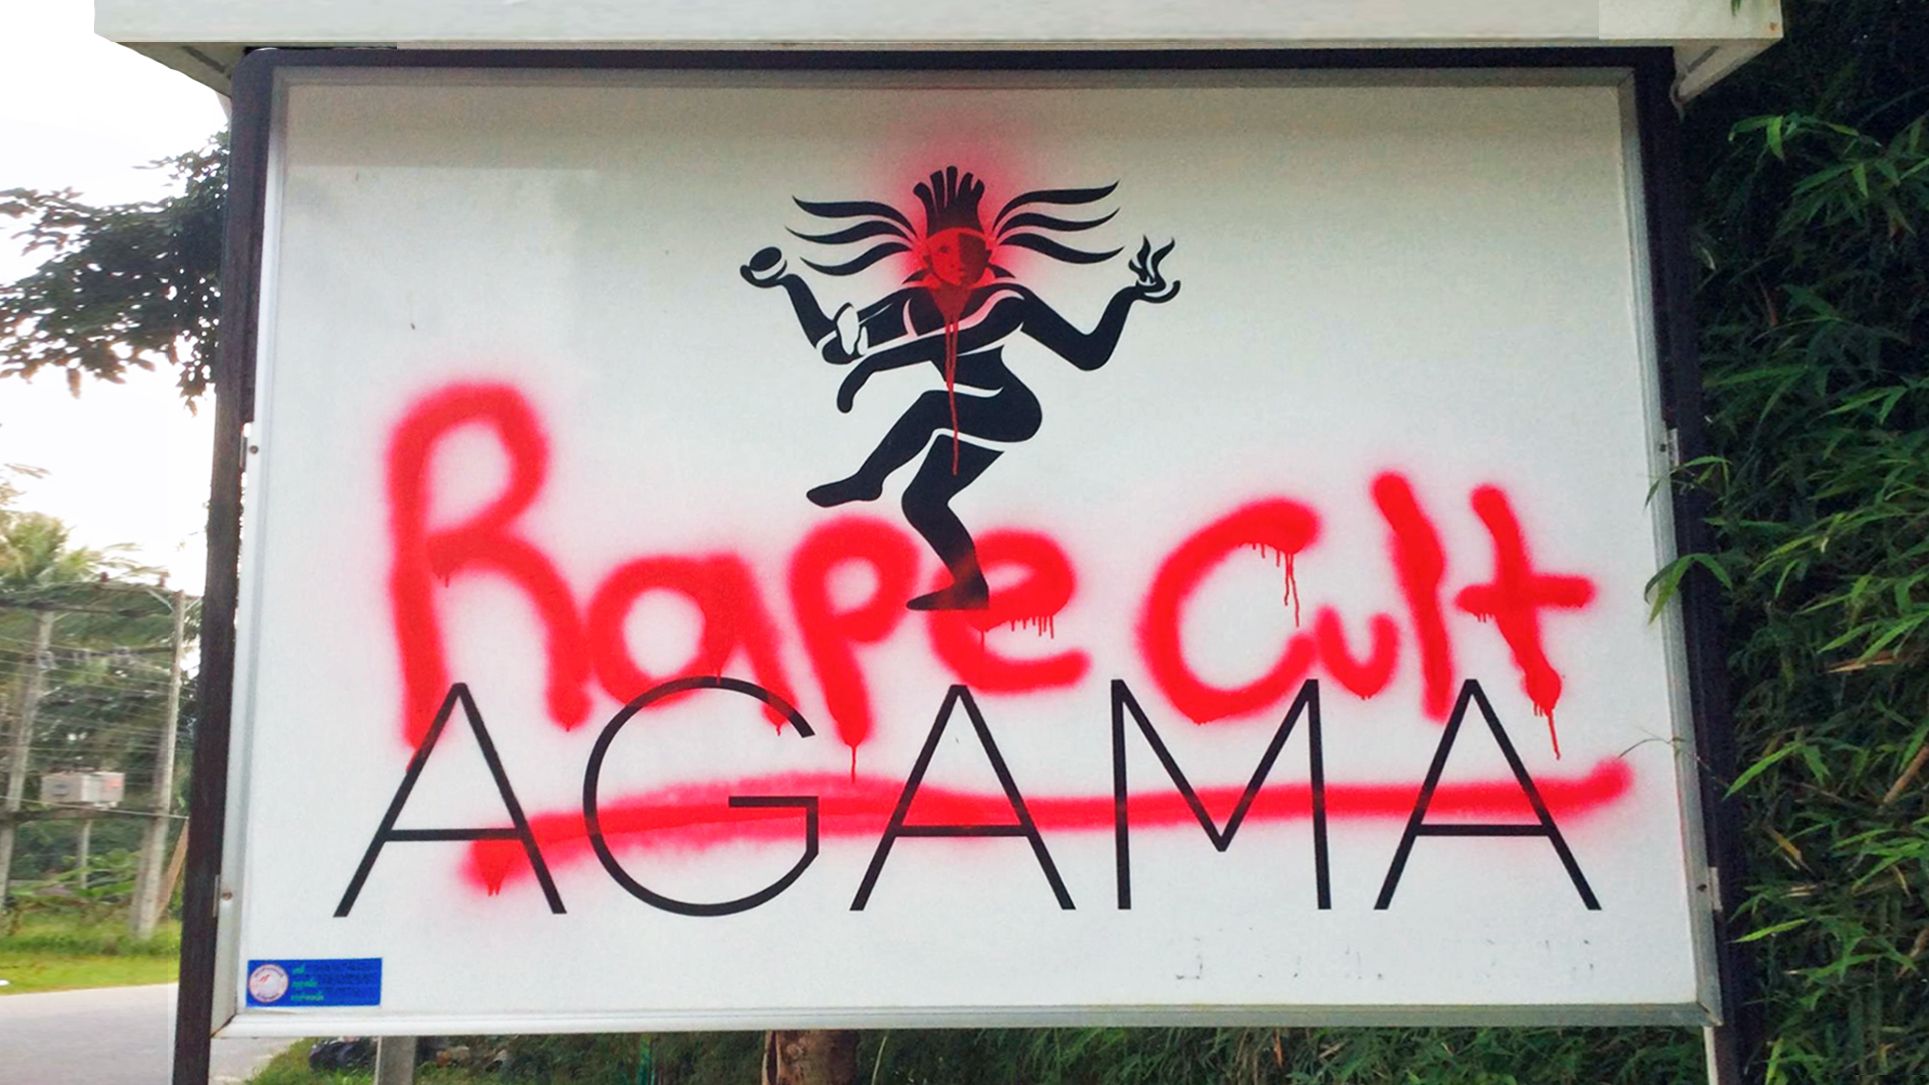 An unknown vandal sprayed “Rape Cult” over the Agama sign at the height of the scandal. Photo: Boycott Agama Yoga Group member
